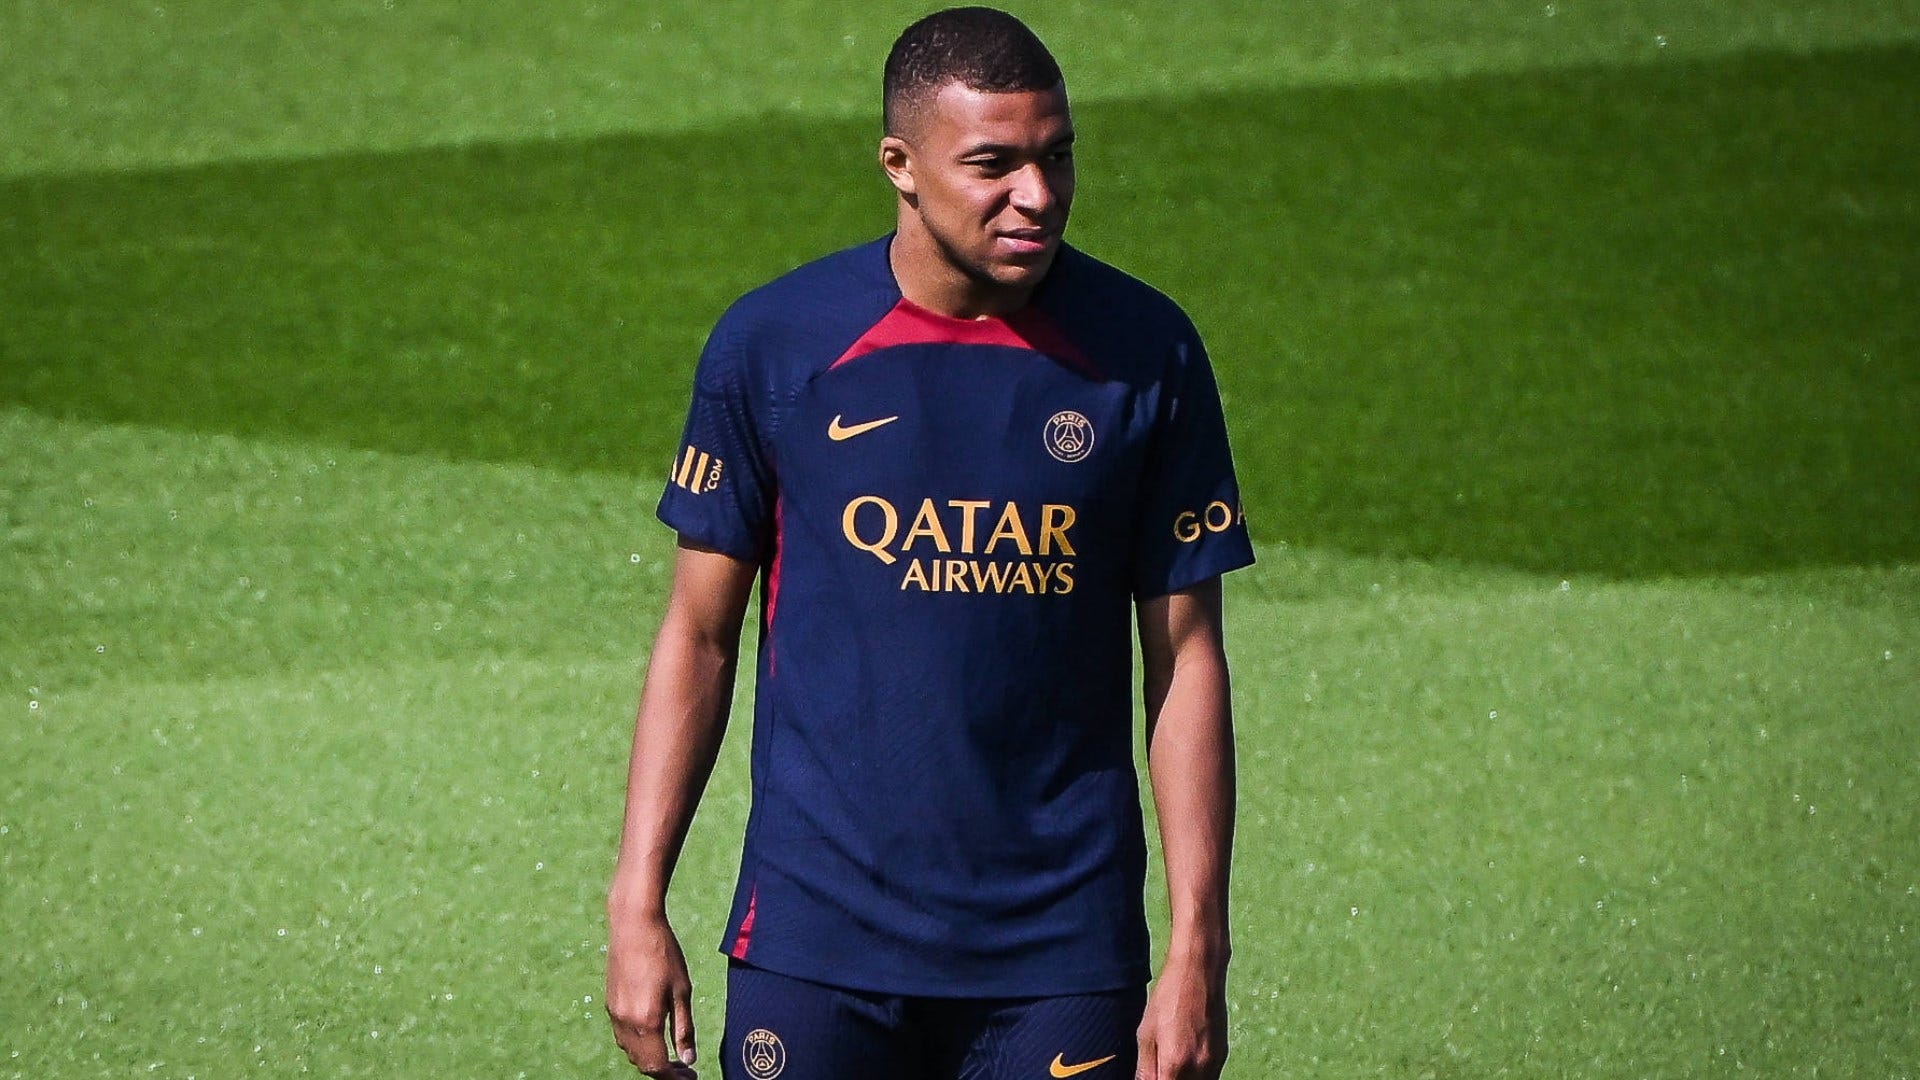 PSG's reasoning for keeping Kylian Mbappe on the sidelines